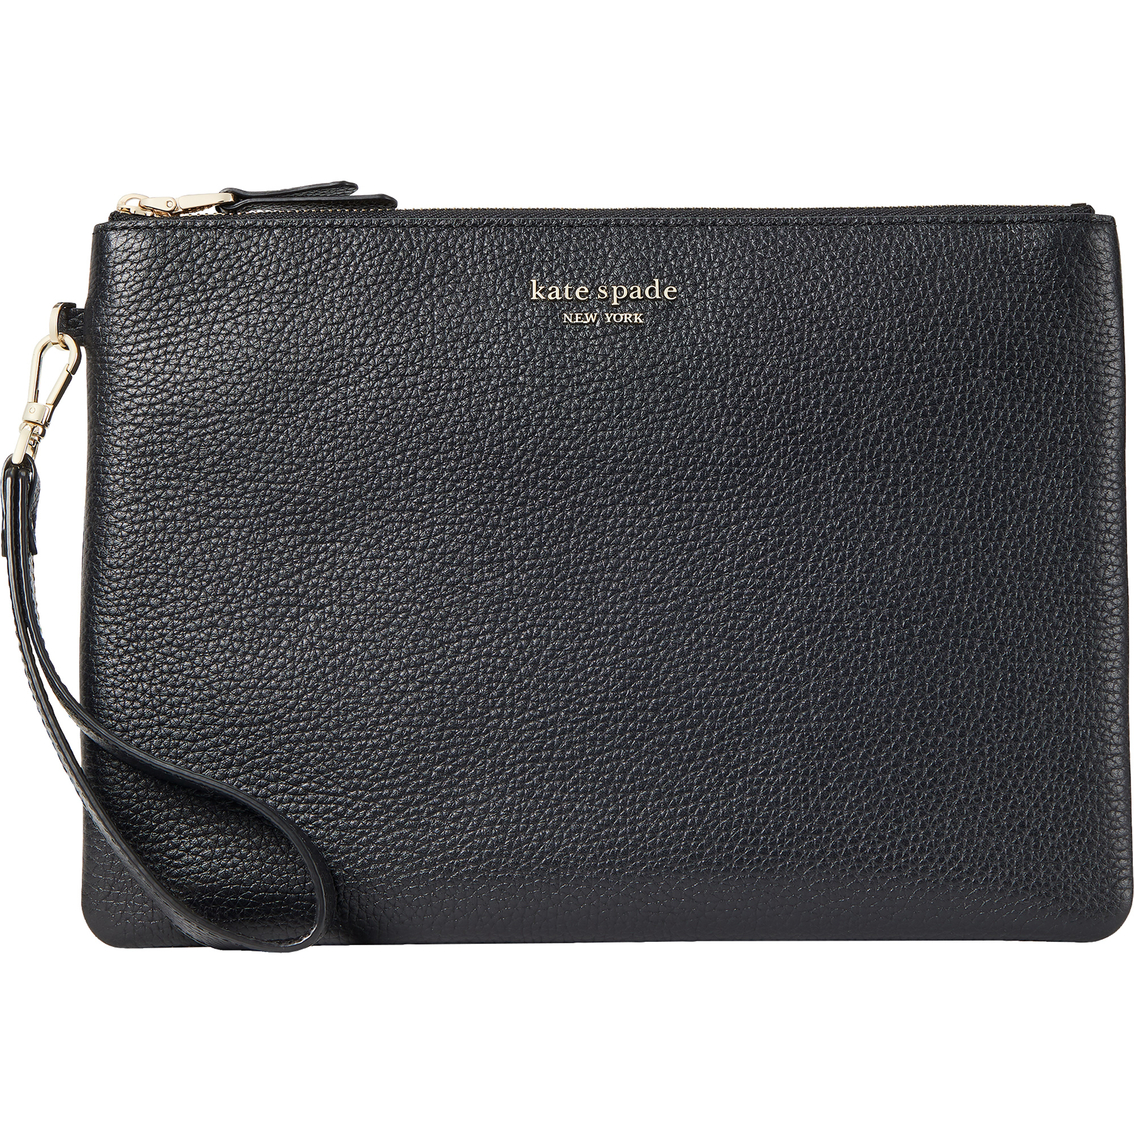 Kate Spade New York Roulette Large Pouch Wristlet | Wristlets, Clutches ...